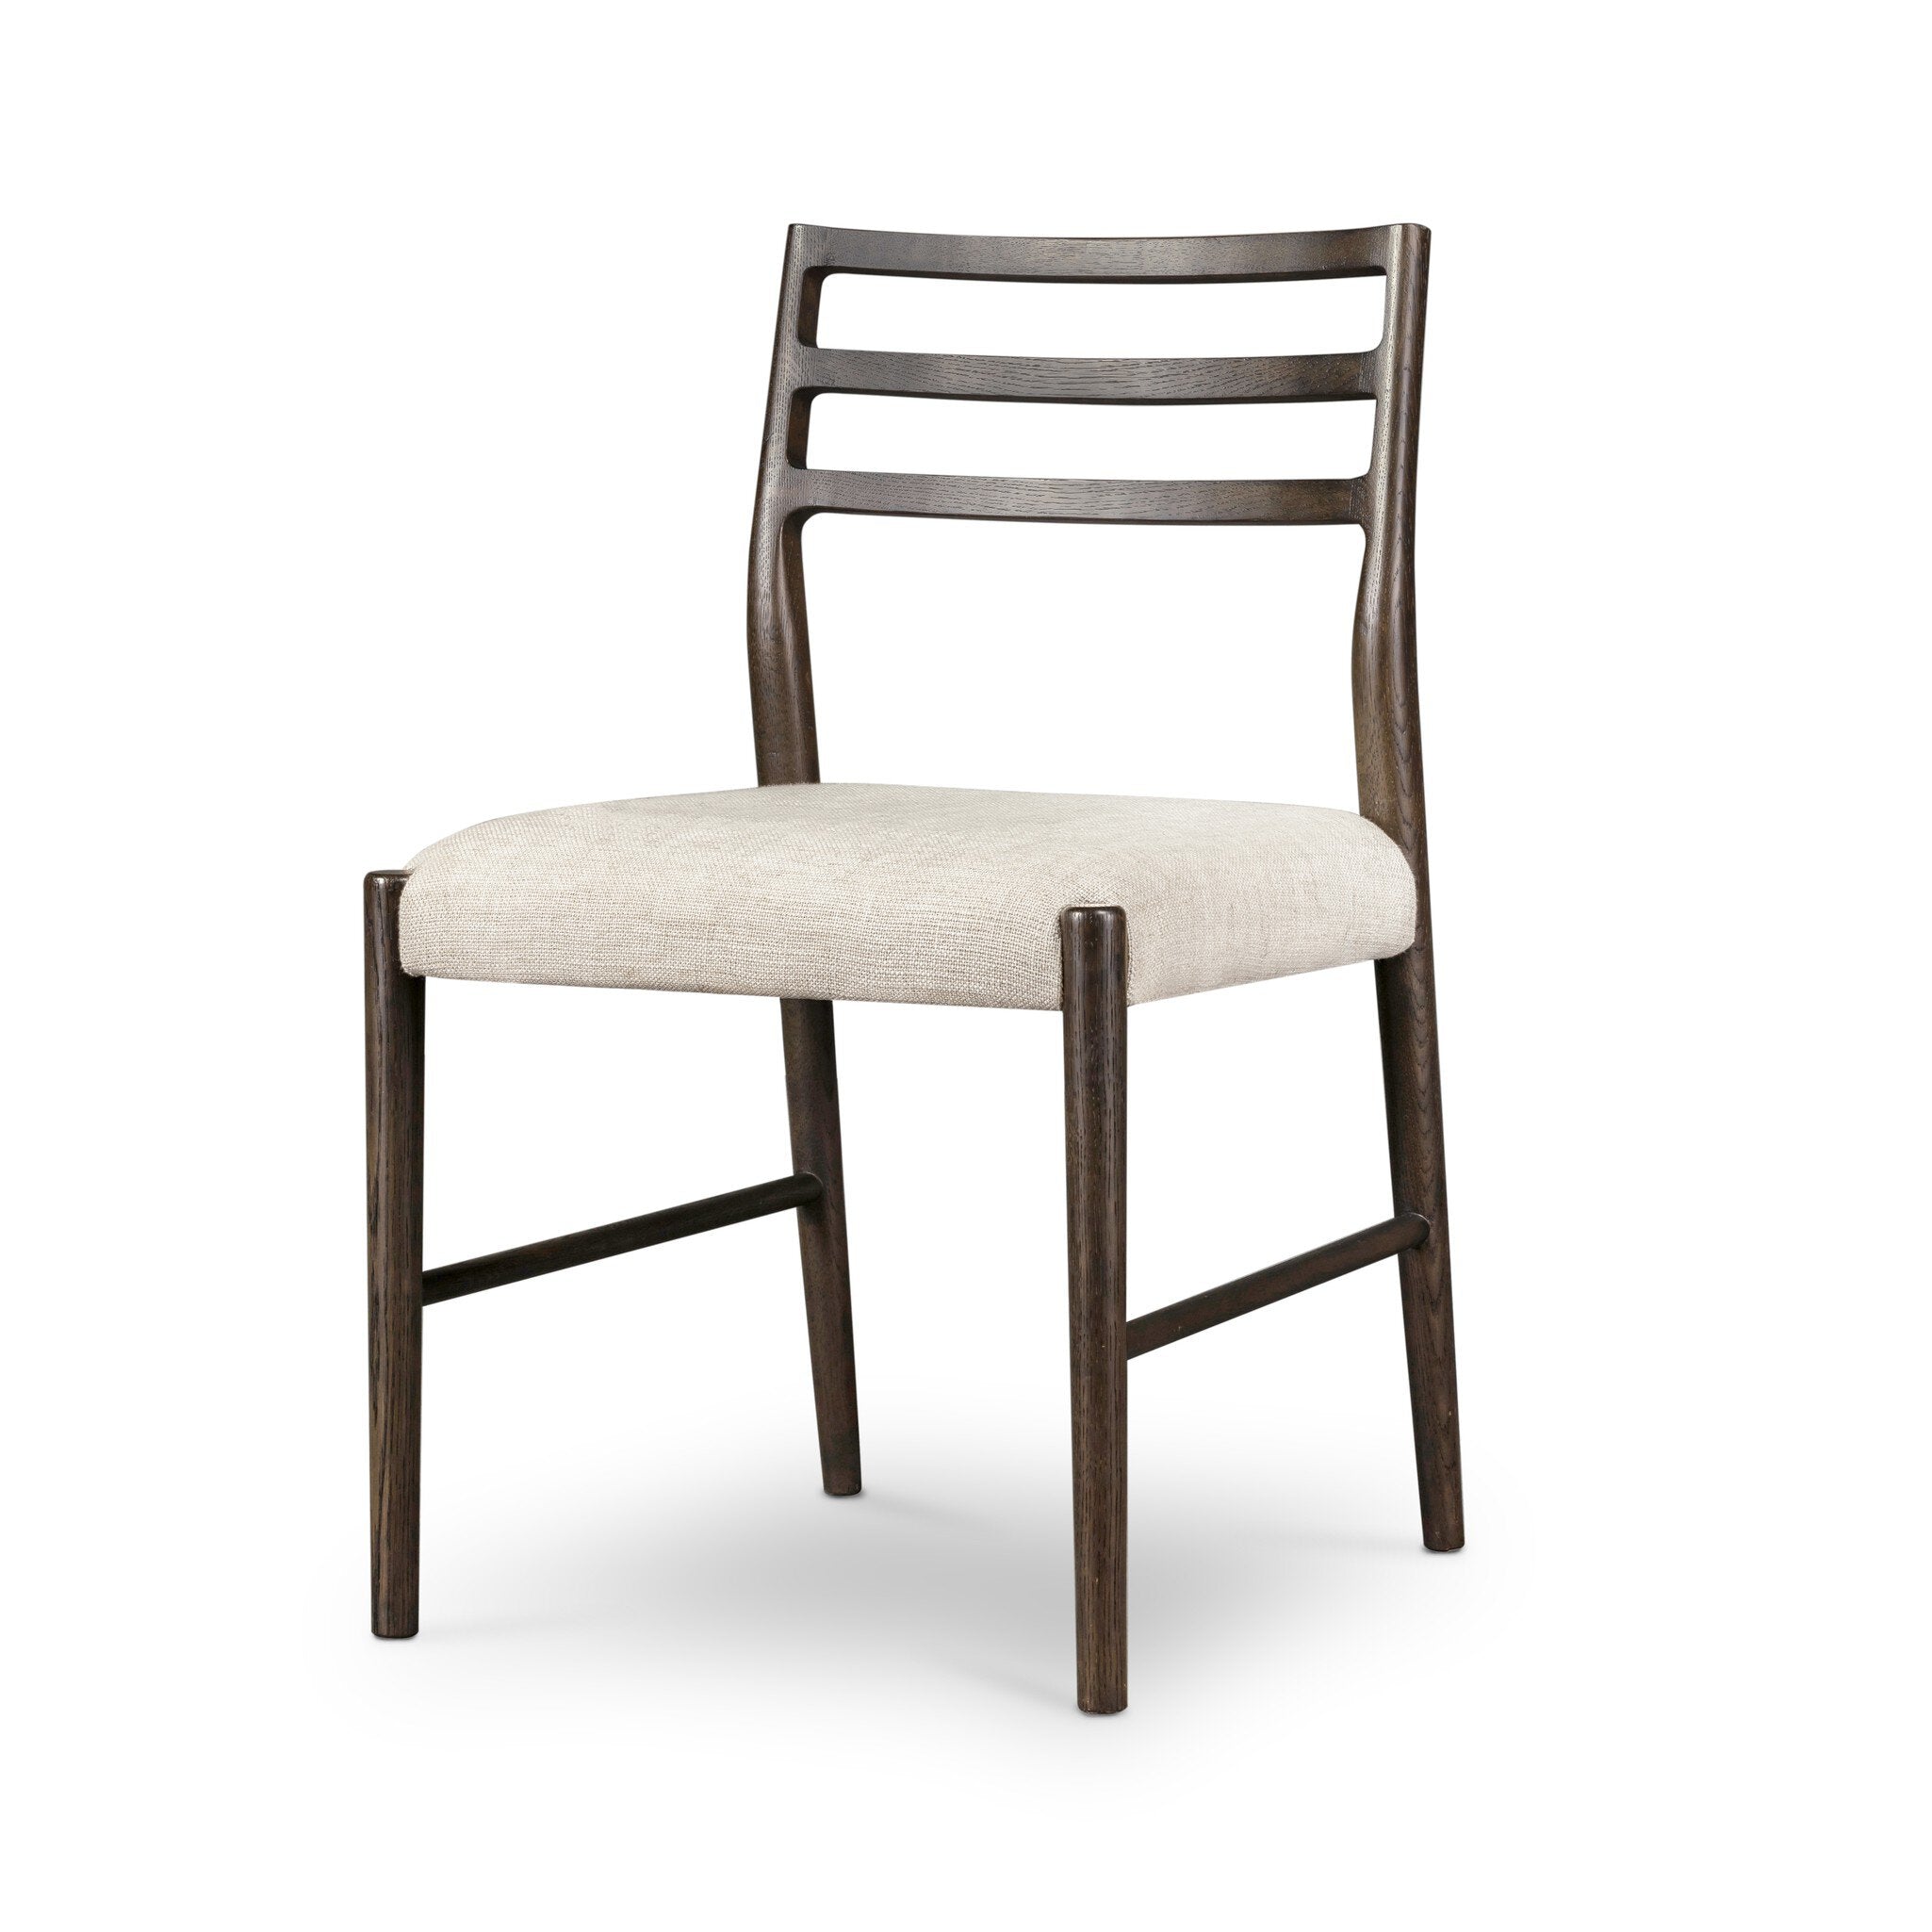 Glenmore Dining Chair - Essence Natural